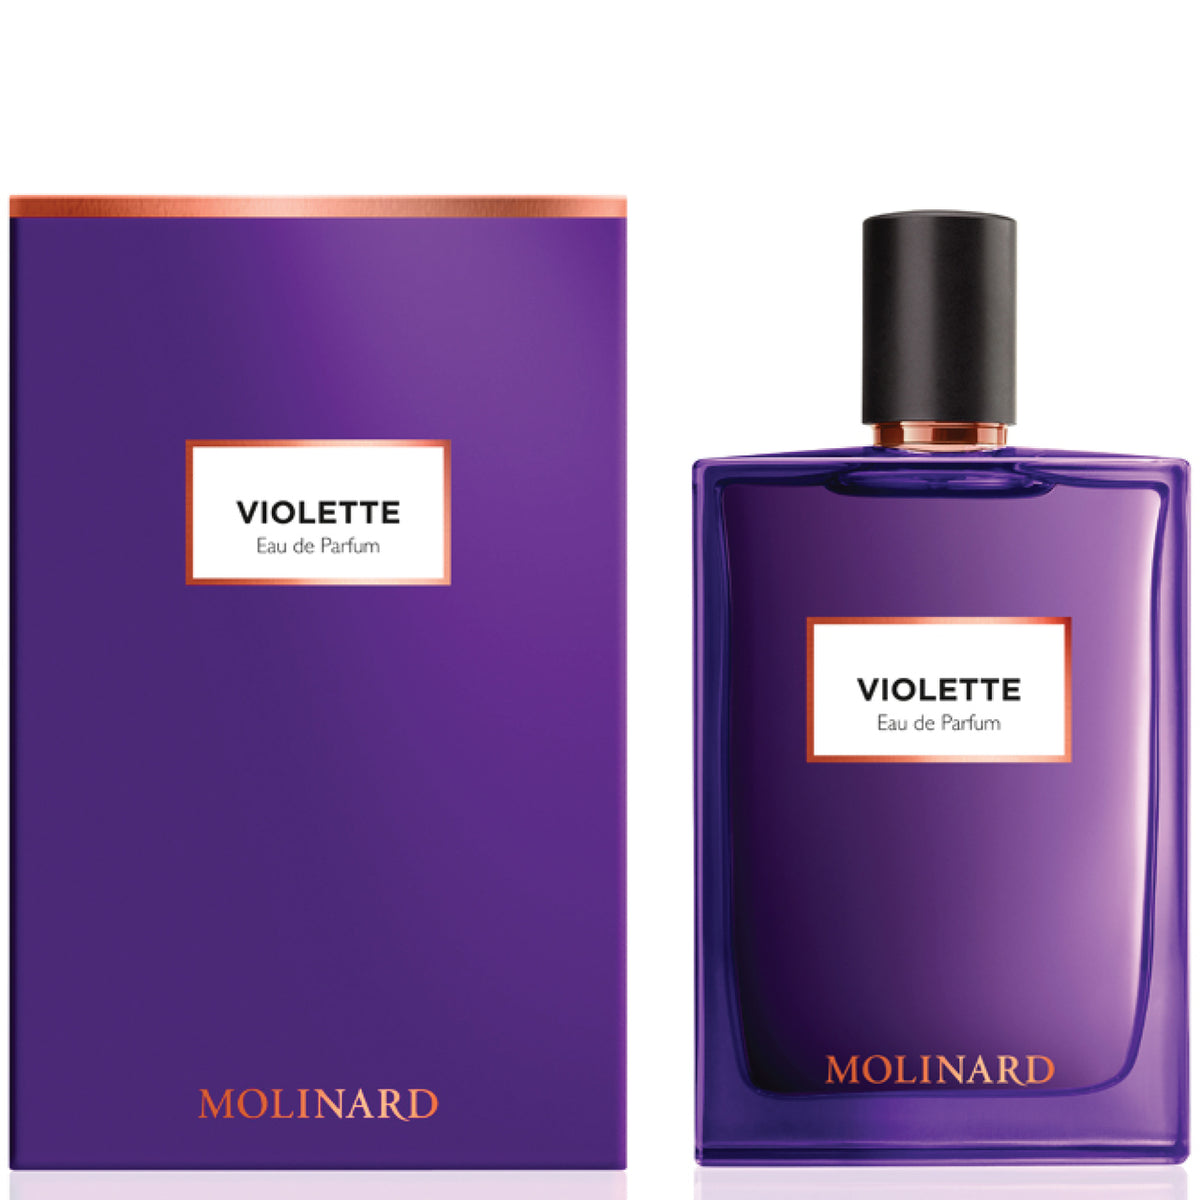 A bottle of Molinard Violette Eau de Parfum perfume next to its matching purple packaging box, both labeled clearly with the fragrance name.